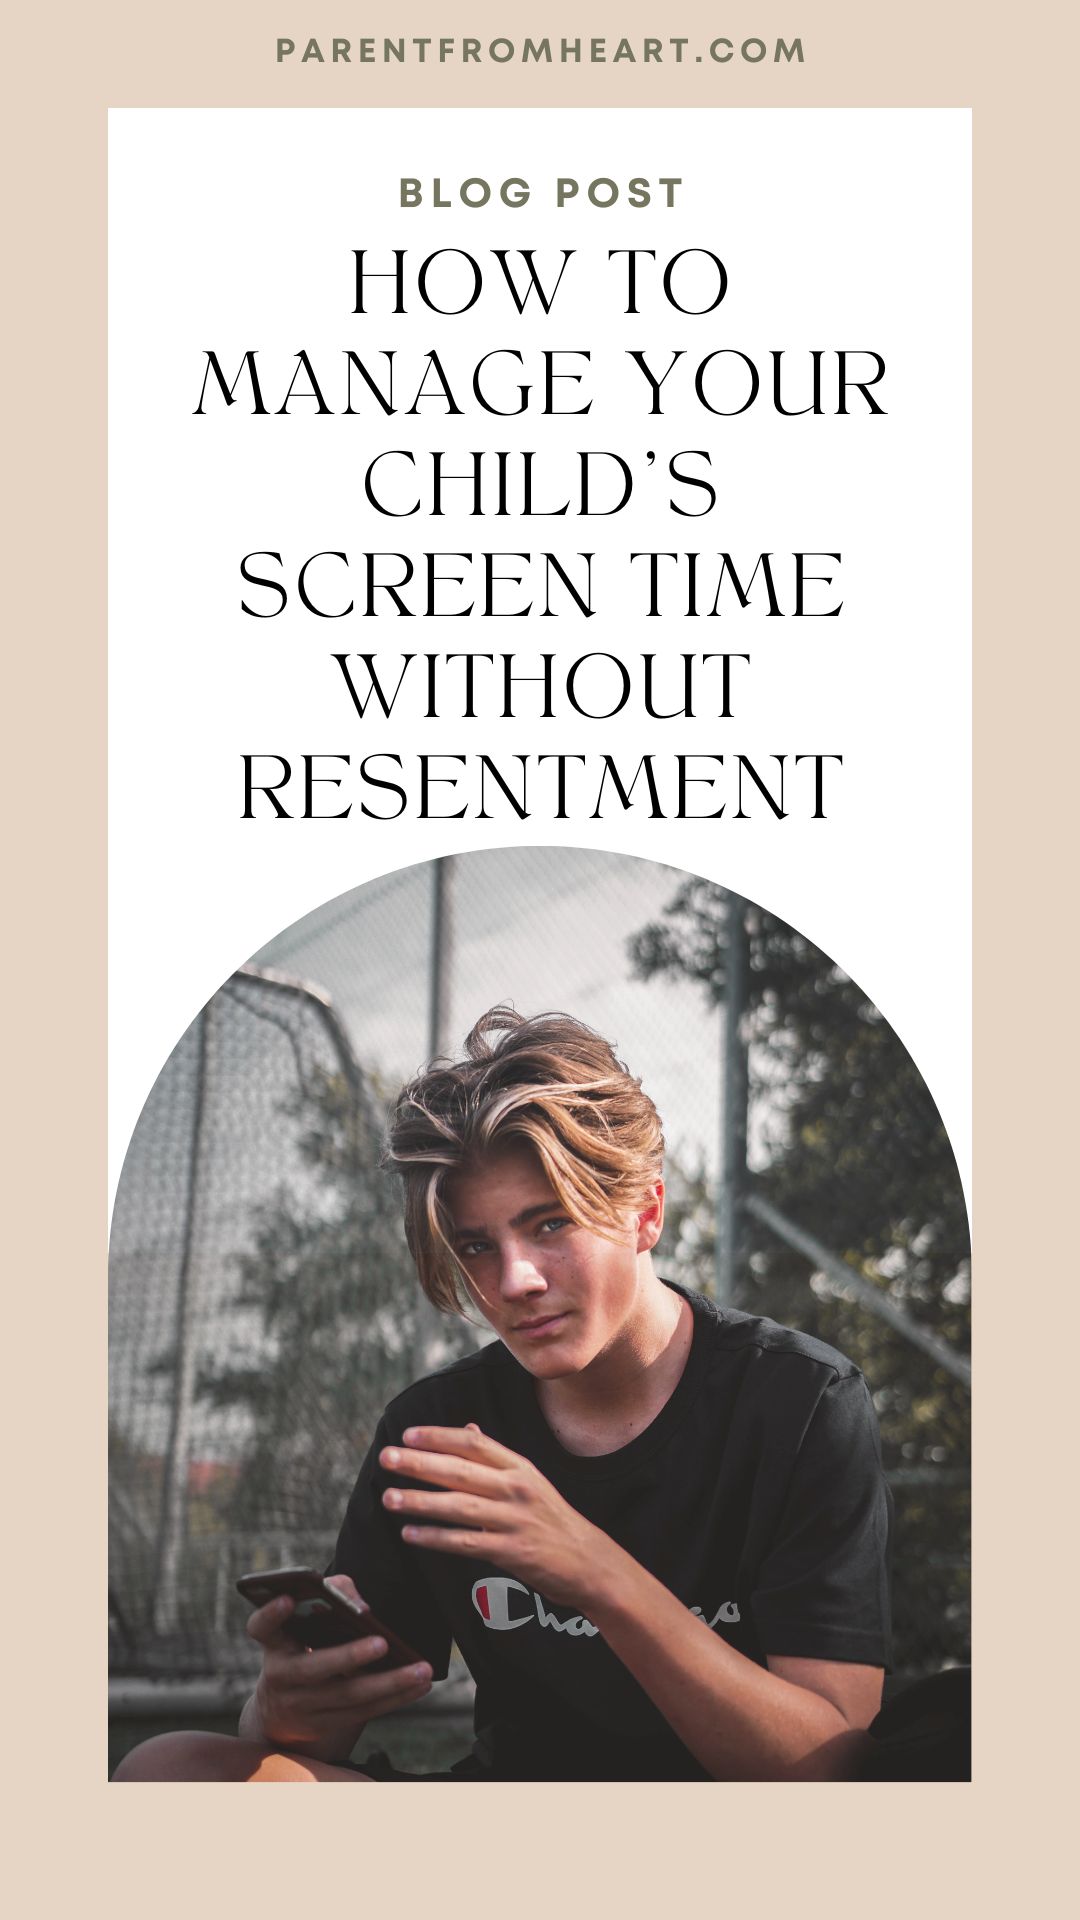 Tips on How to Manage Your Childs's Screen Time Without Resentment 